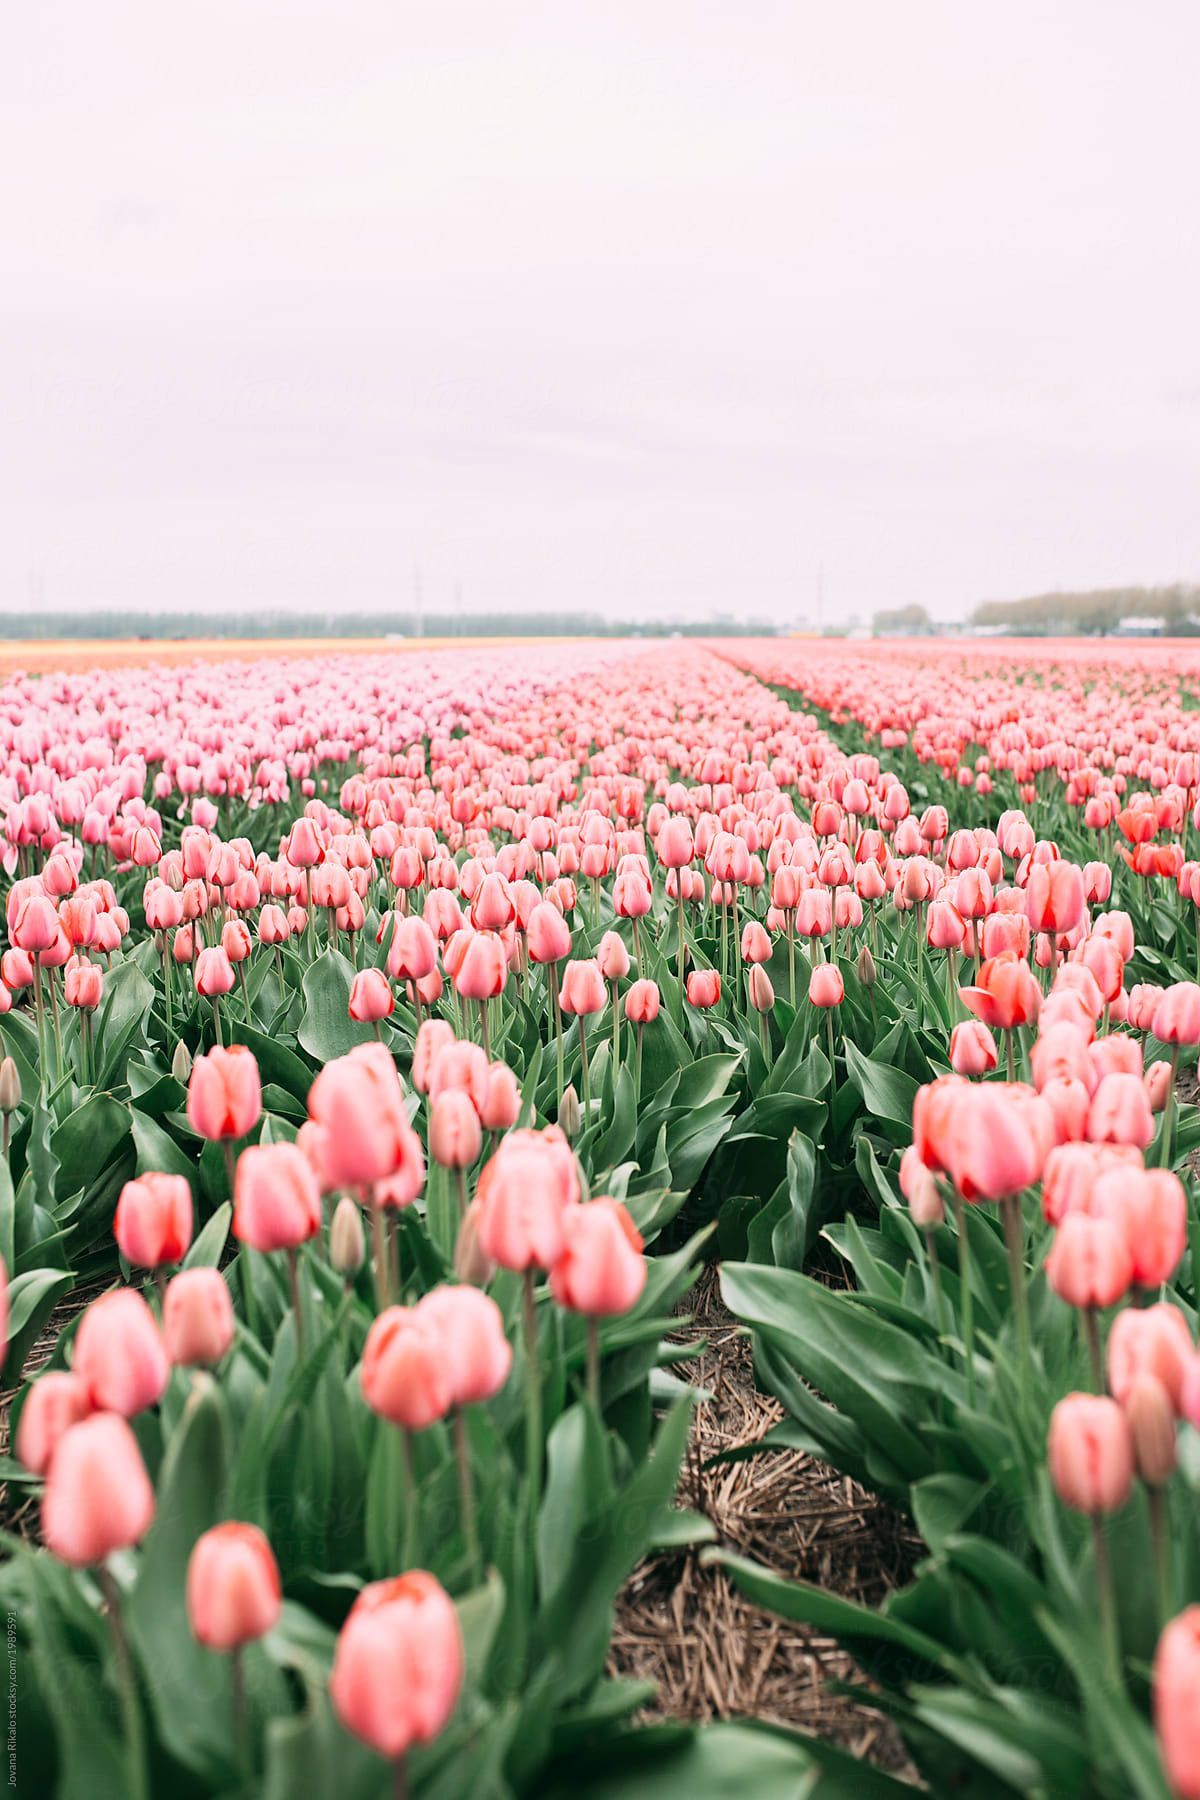 A field of pink tulips by Sarah Lalone - Tulip